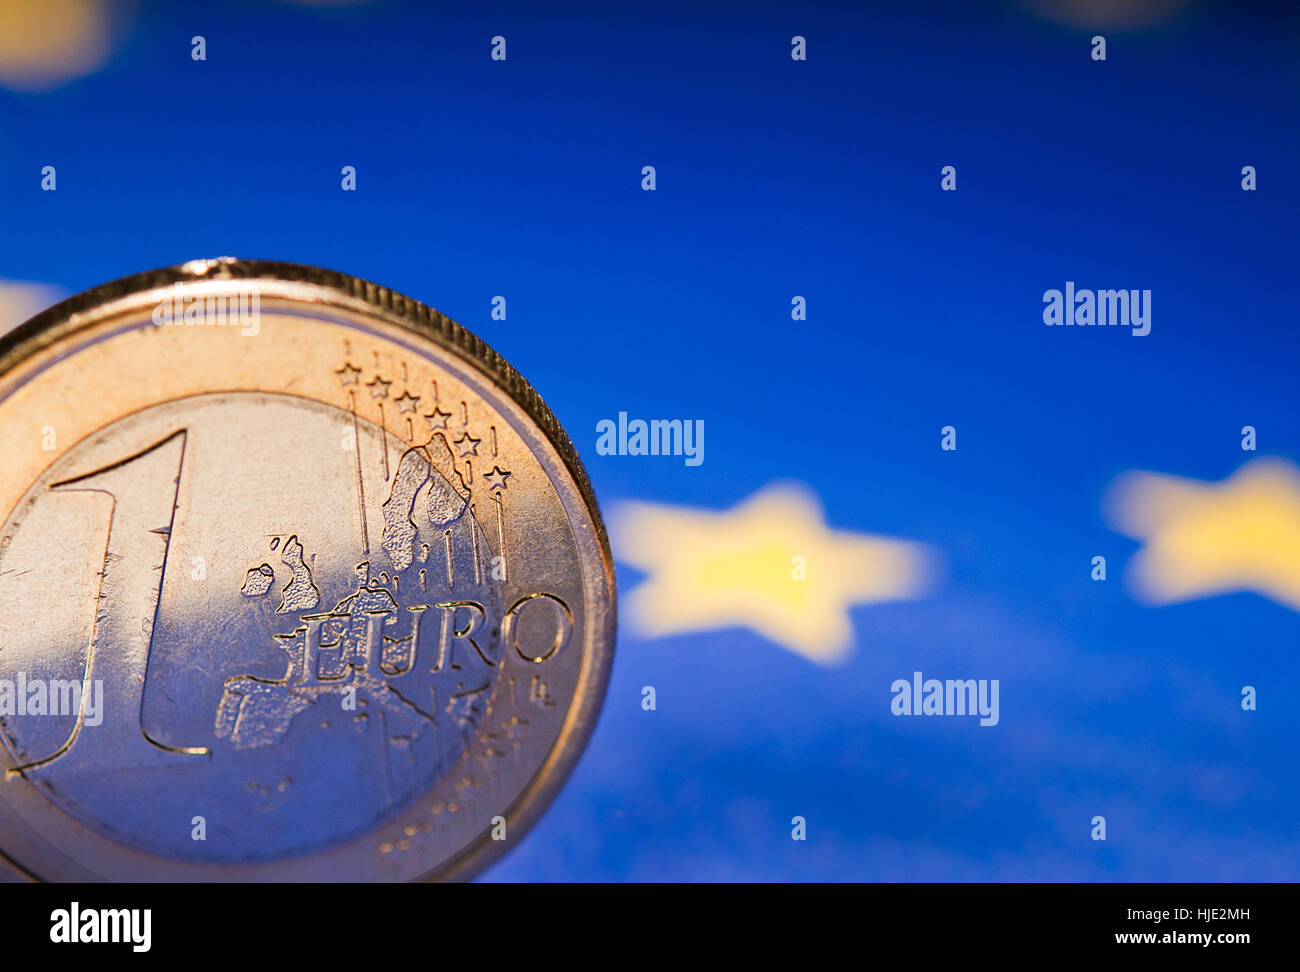 sign, signal, blue, blank, european, caucasian, euro, currency, europe, coin, Stock Photo